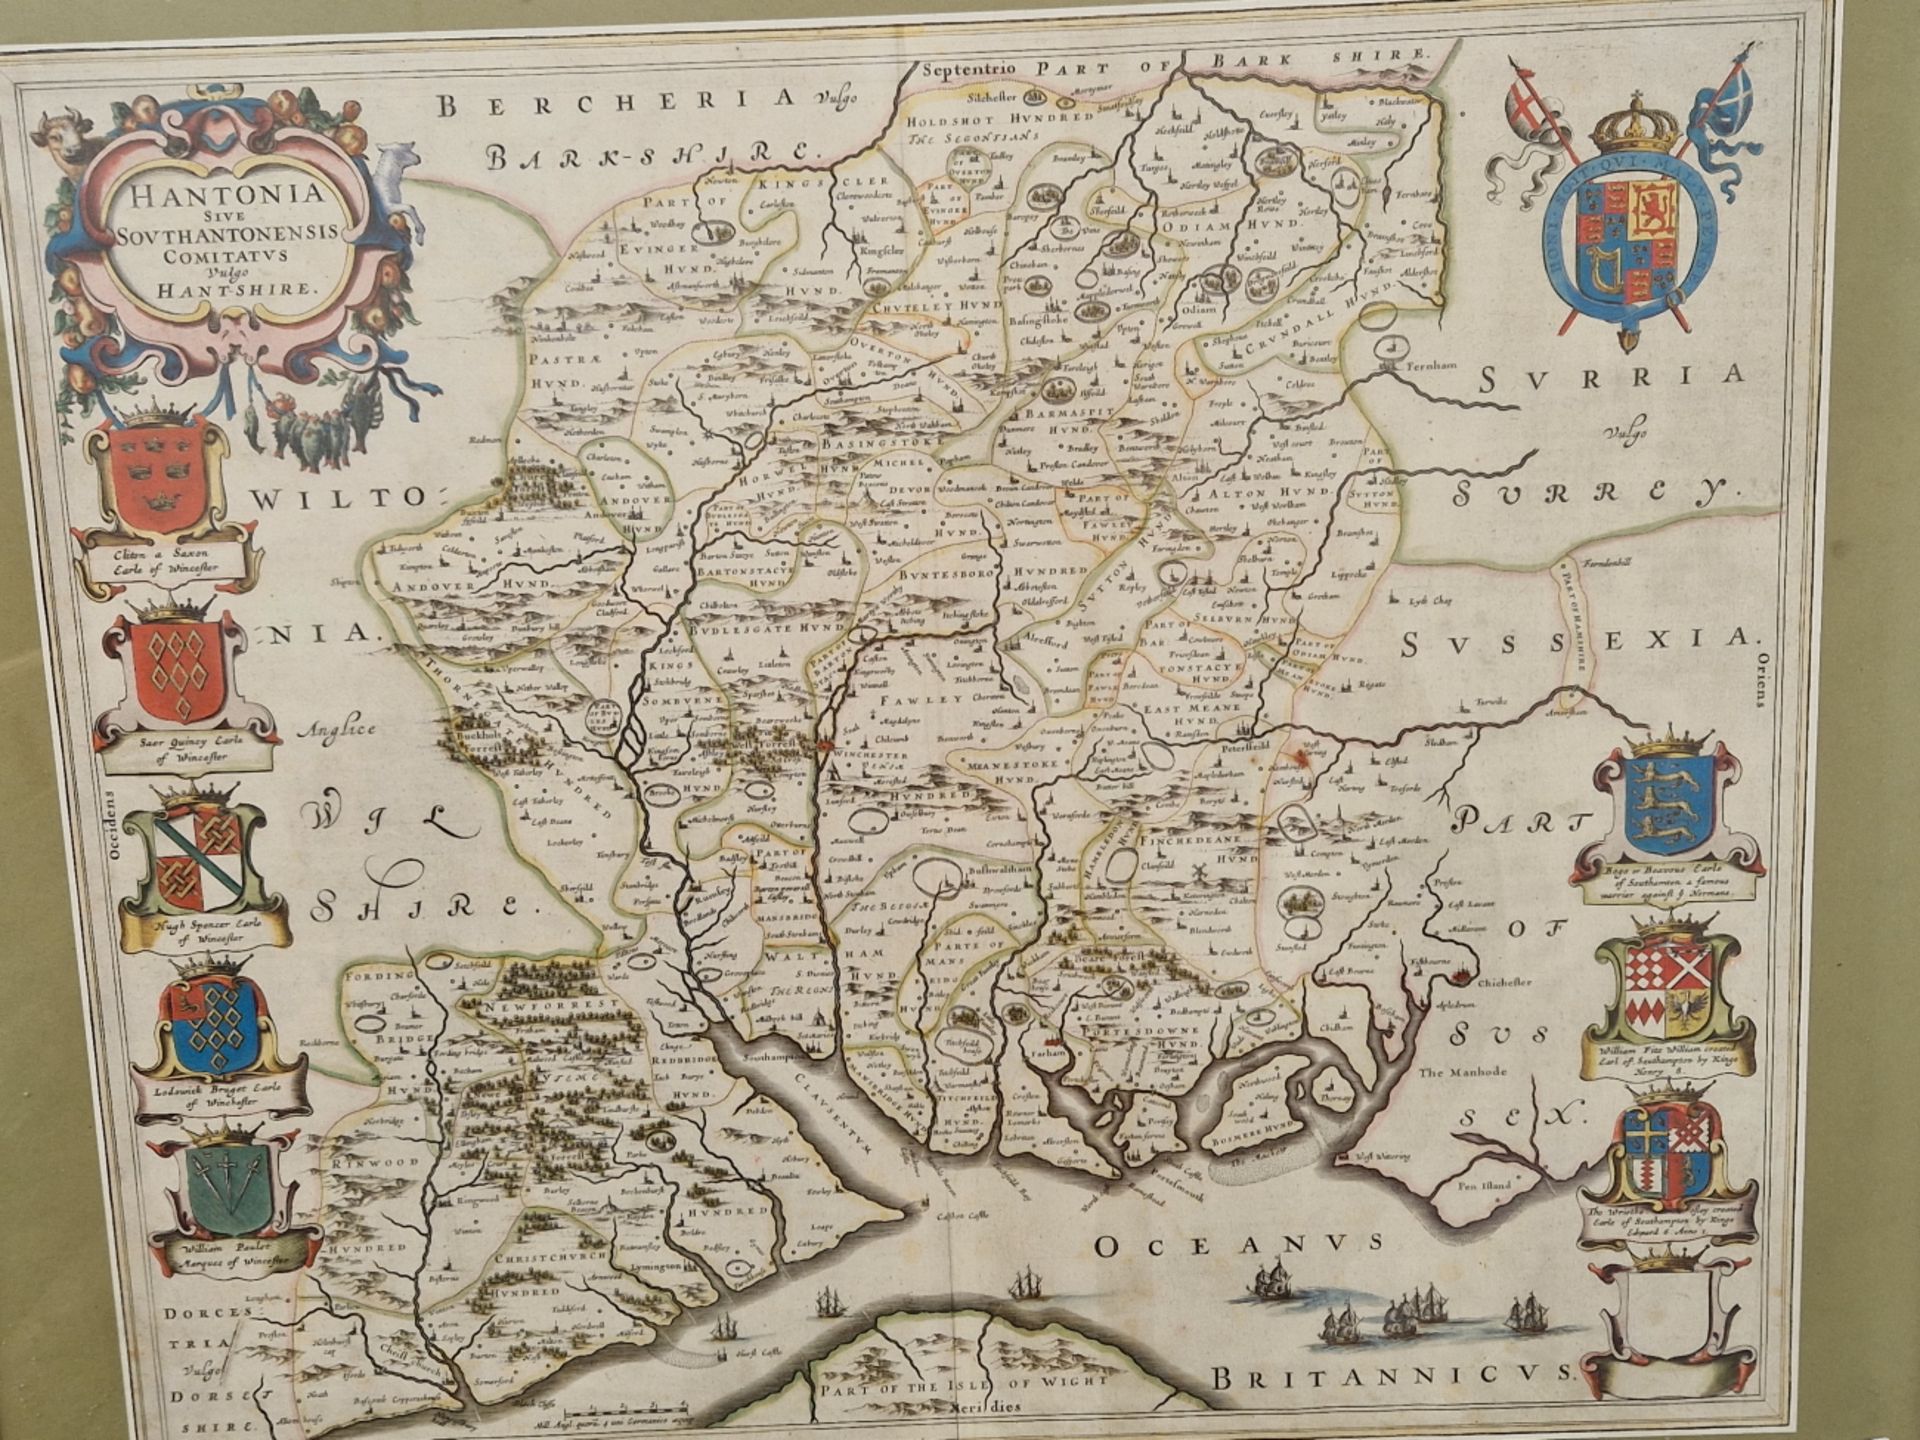 A COLOURED MAP OF HAMPSHIRE, AFTER WILLIAM JANSZOON BLAEU